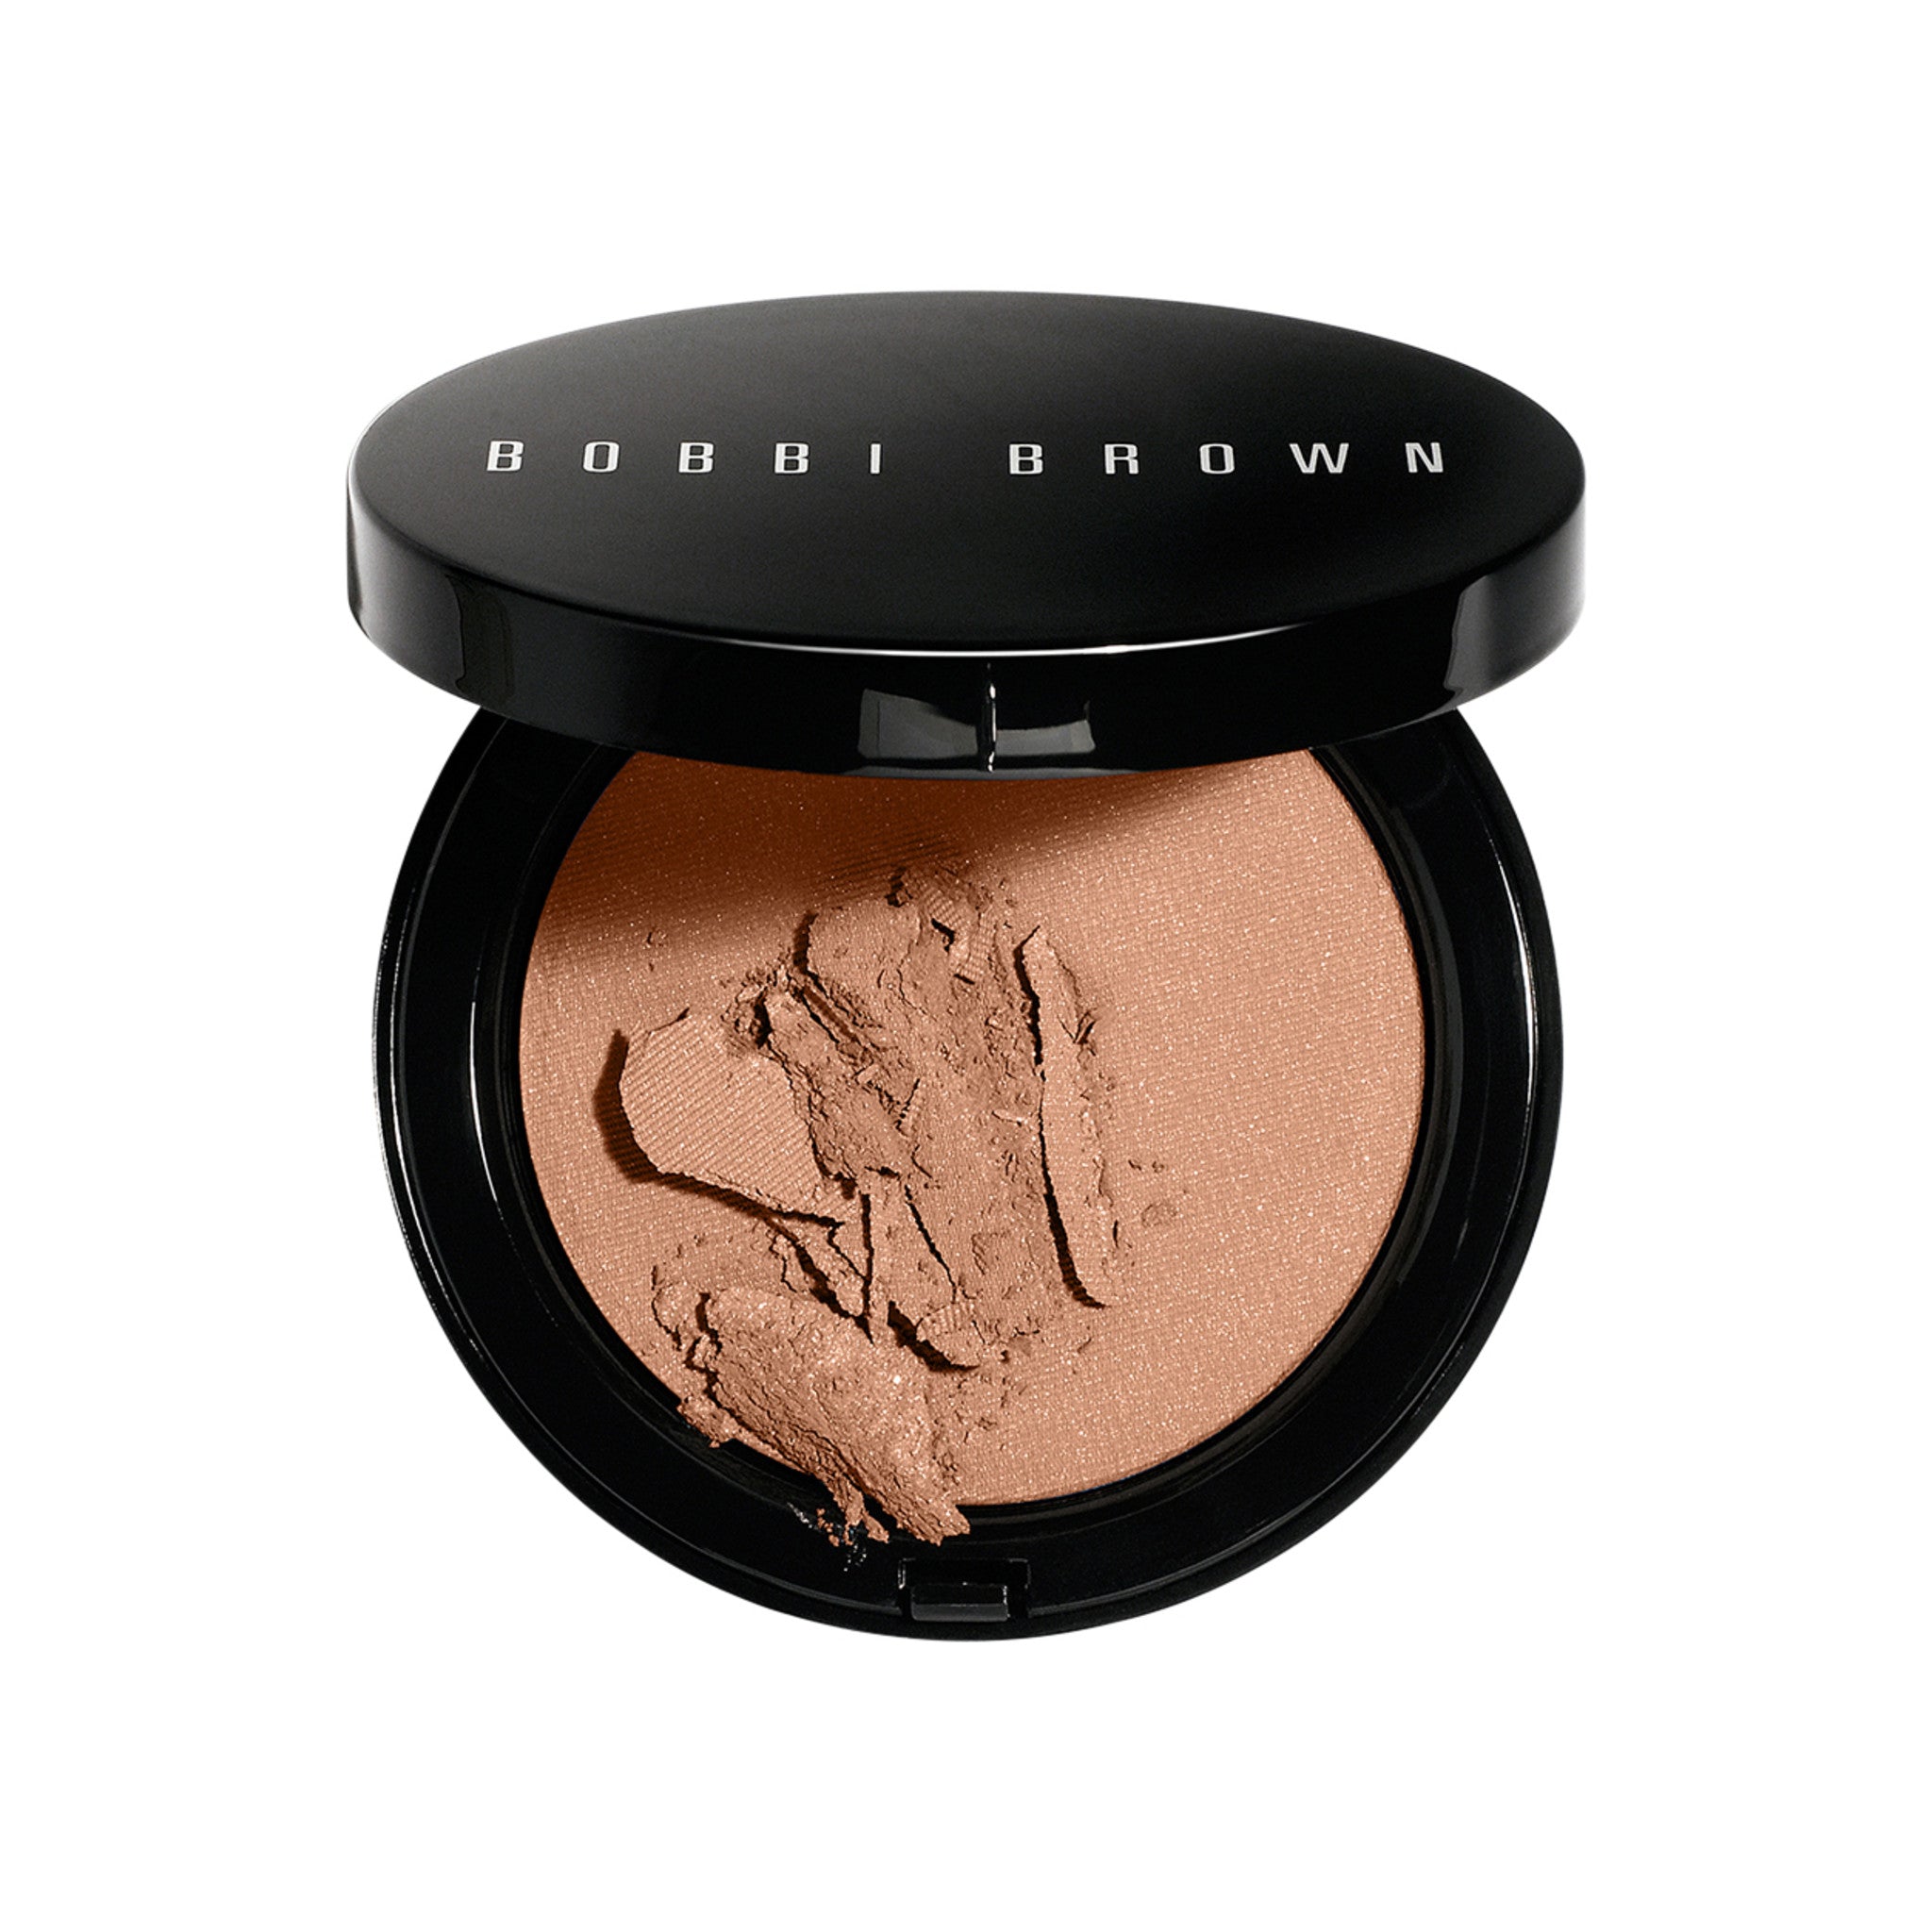 Bobbi Brown Illuminating Bronzing Powder Color/Shade variant: Aruba main image. This product is in the color gold